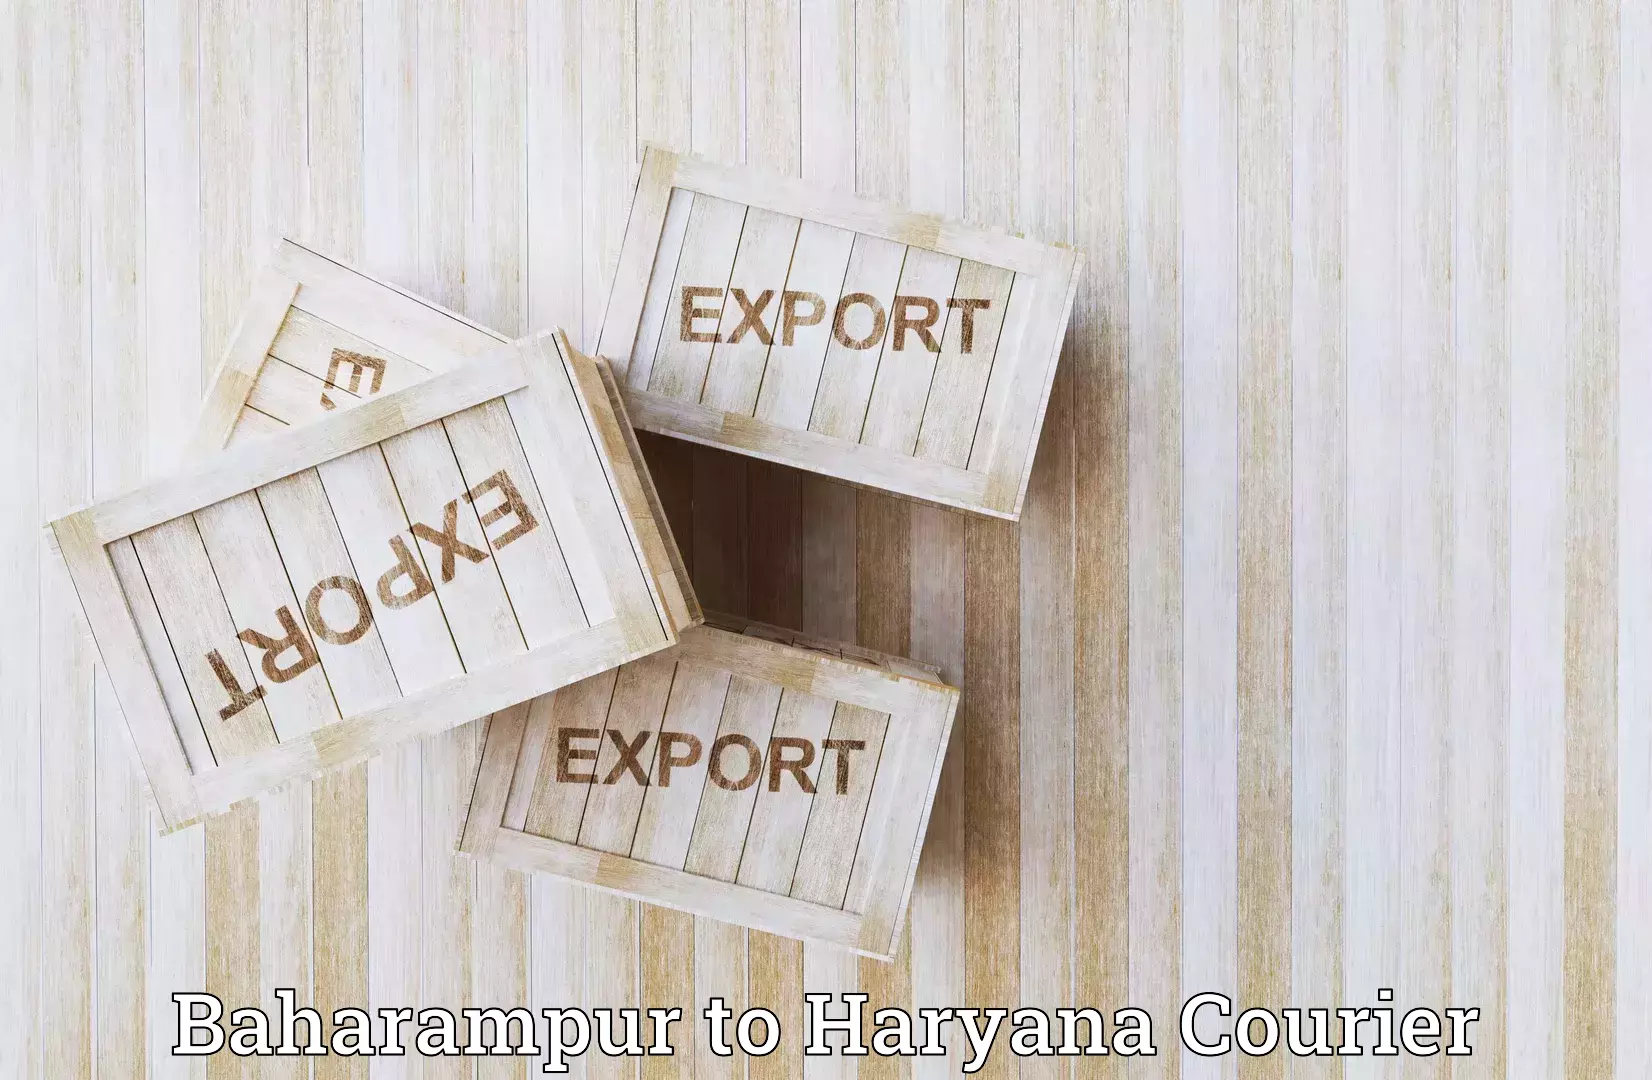 Customer-oriented courier services Baharampur to Gurgaon